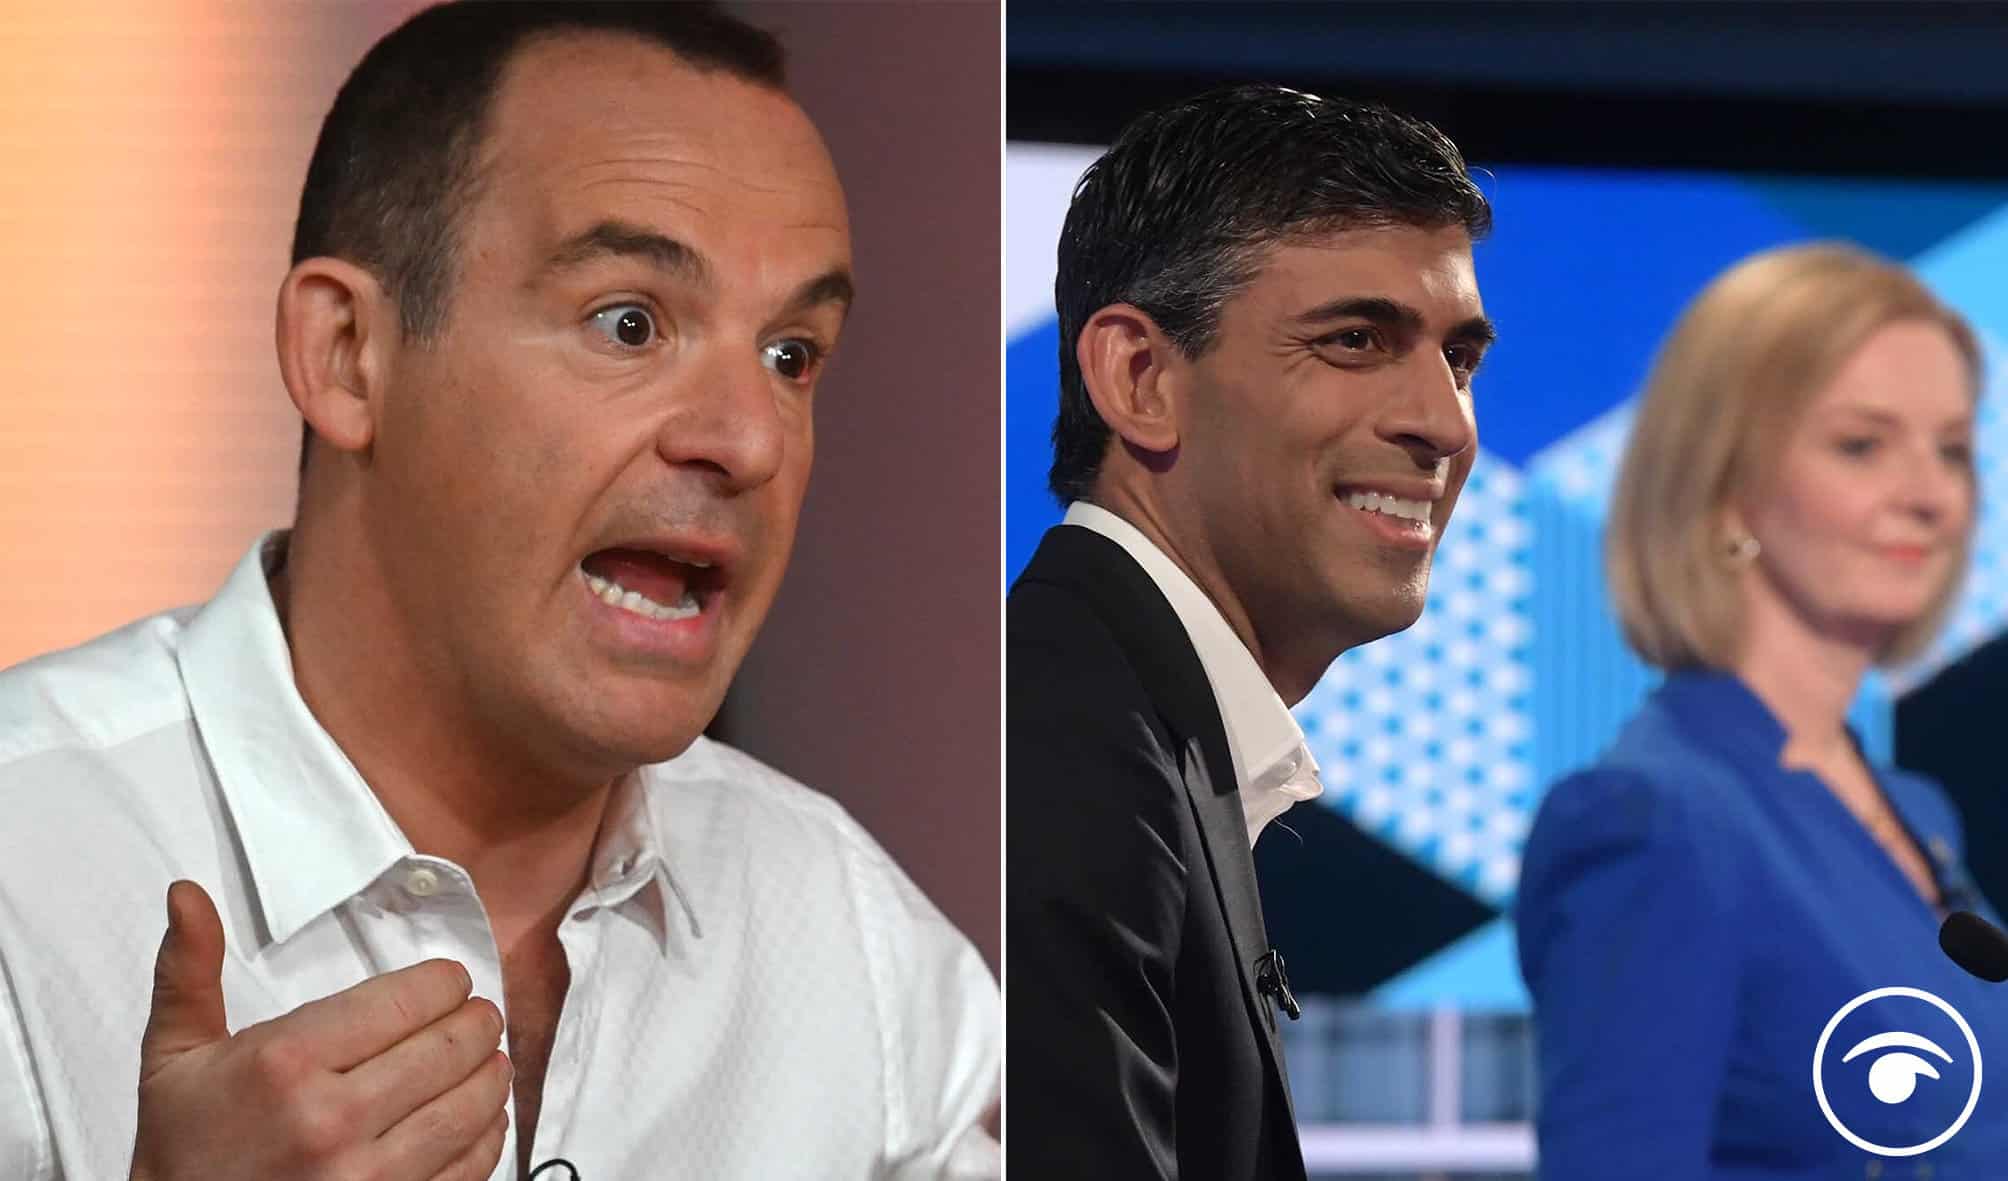 Martin Lewis requests next PM to address cost of living crisis with him on TV – but will they appear?